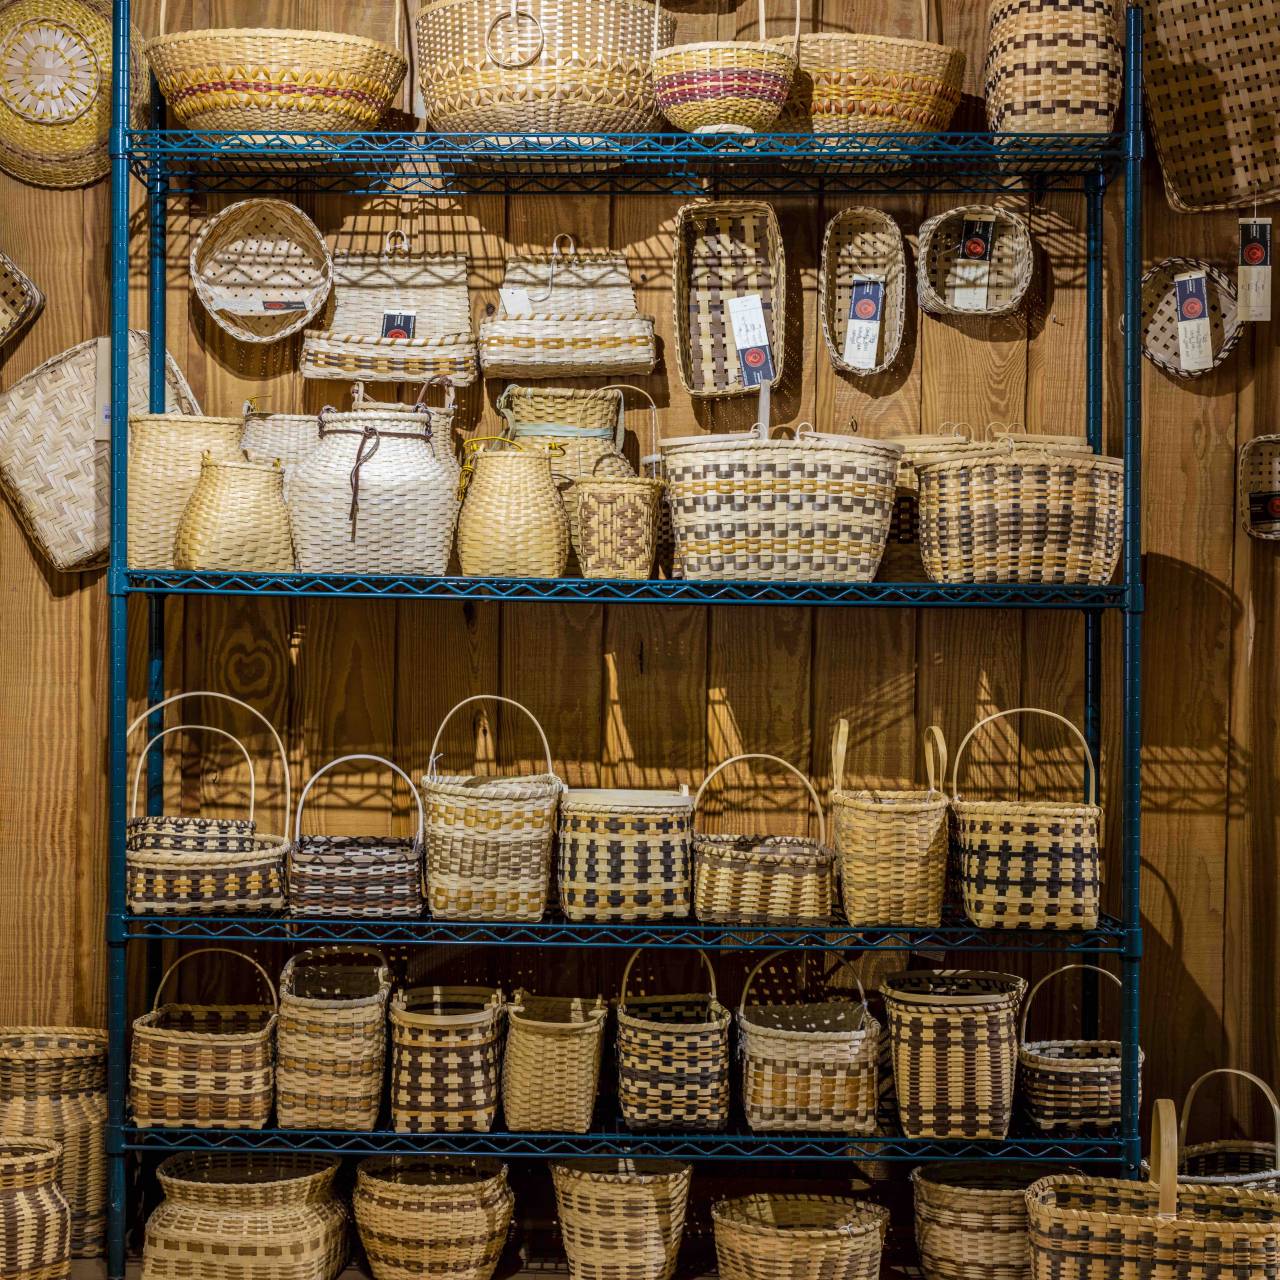 A variety of handcrafted Cherokee baskets displayed on wooden shelves, featuring different sizes, patterns, and weaving techniques. Each basket is uniquely designed with natural tones.